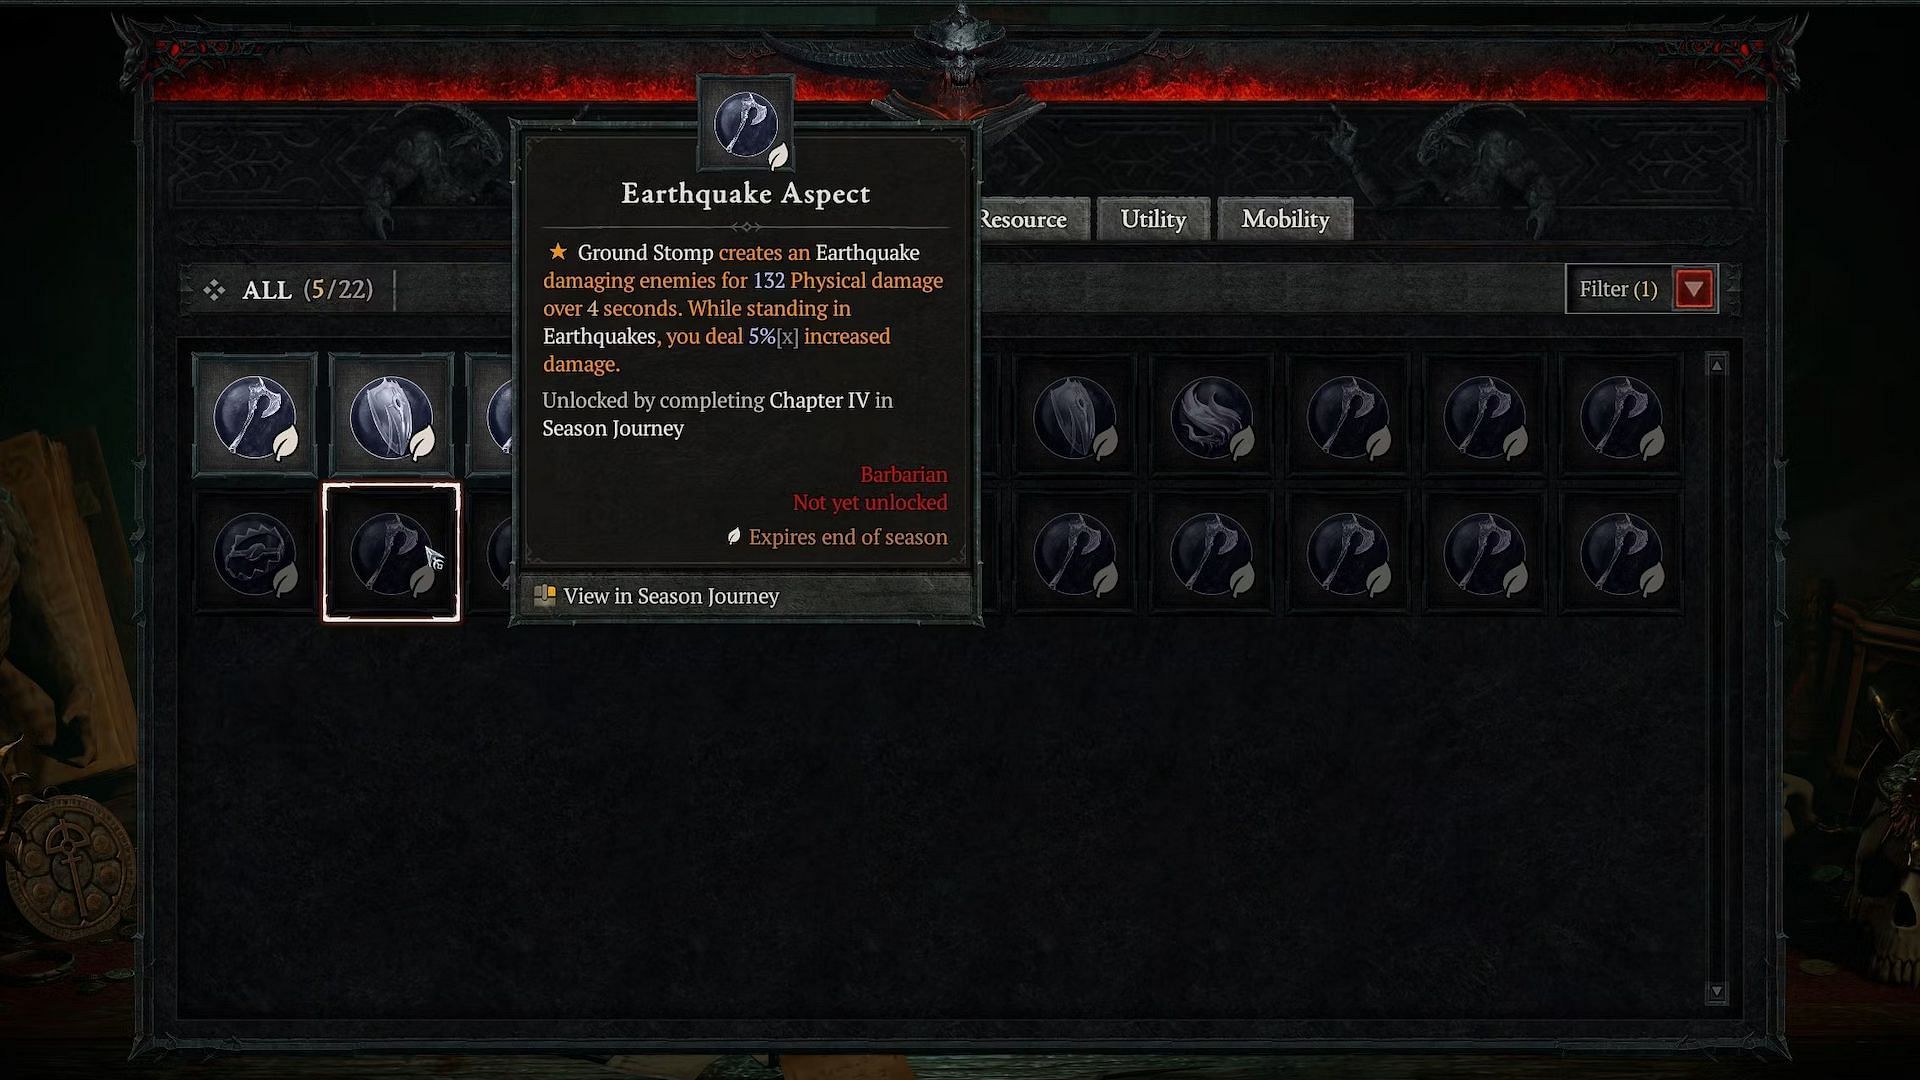 This Aspect triggers an earthquake when one uses Ground Stomp (Image via Diablo 4)